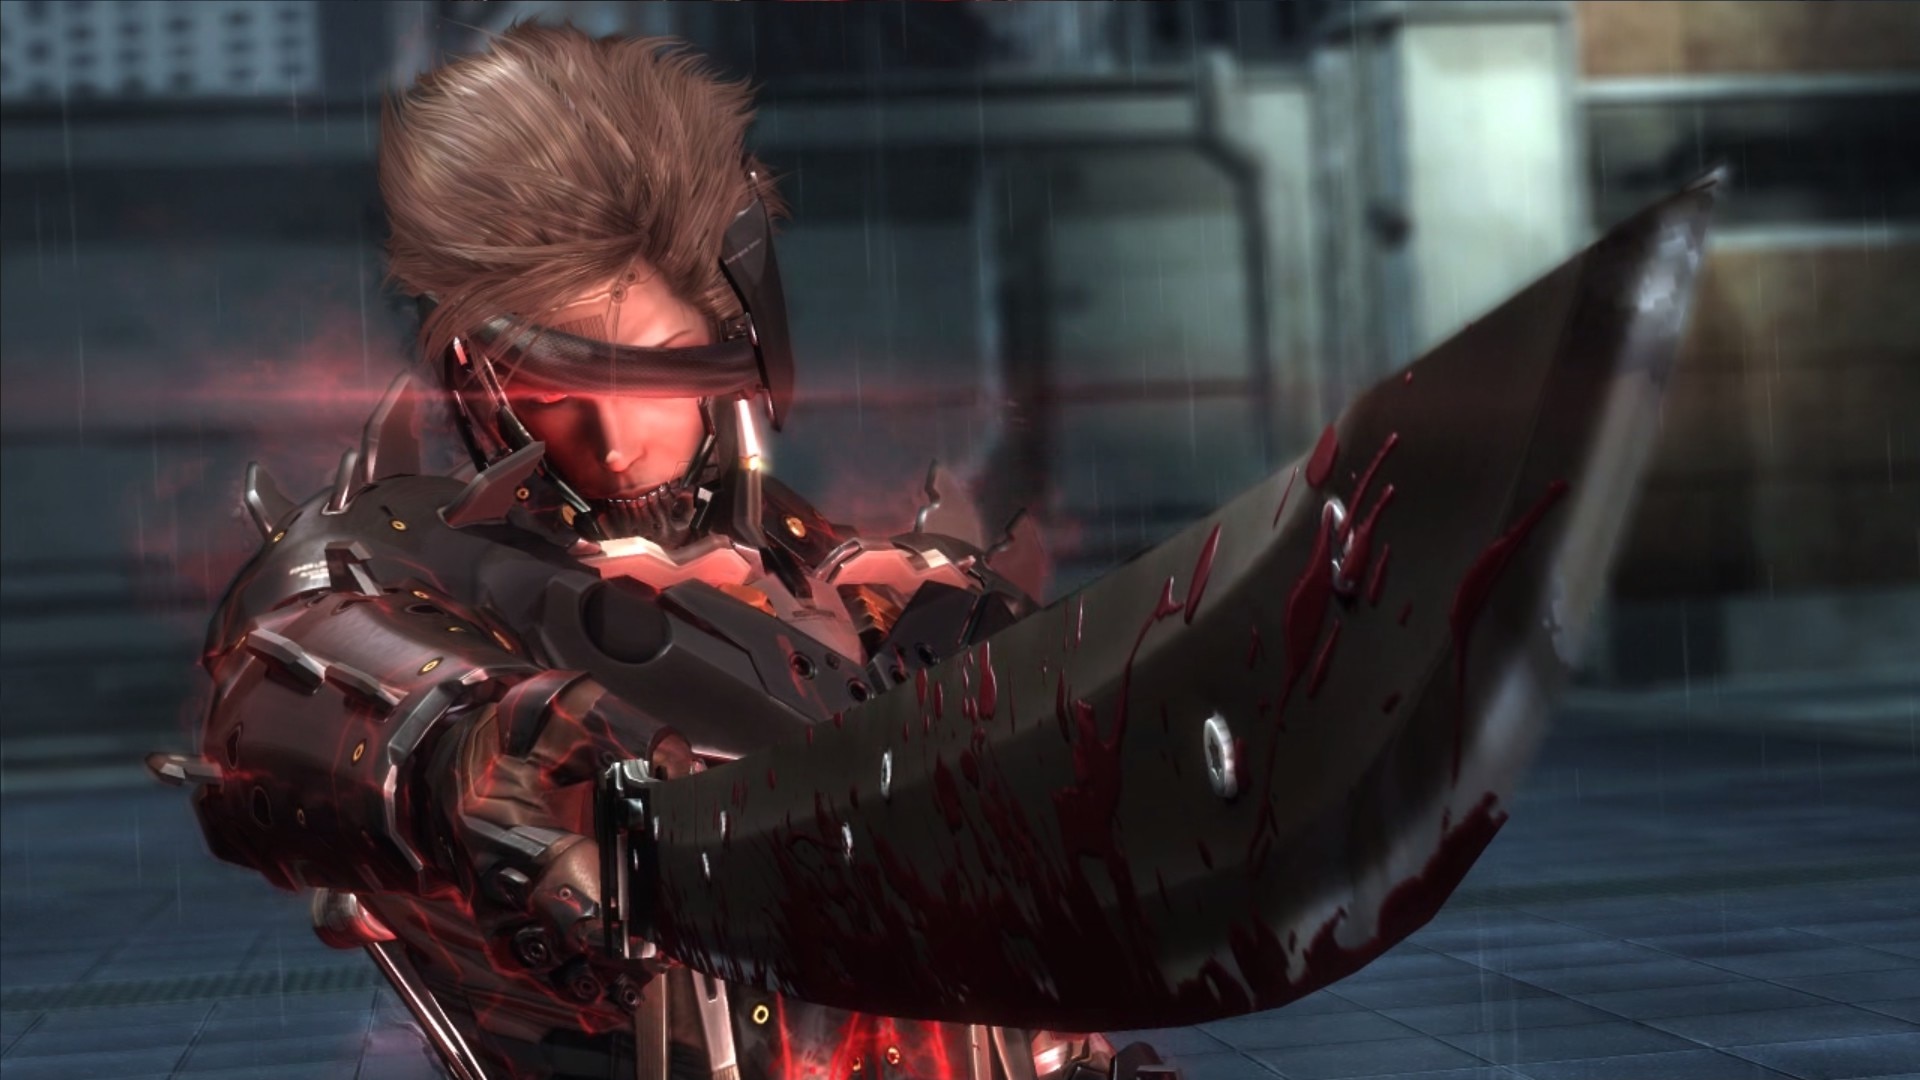 Metal Gear Solid Can Work Without Hideo Kojima - Niche Gamer